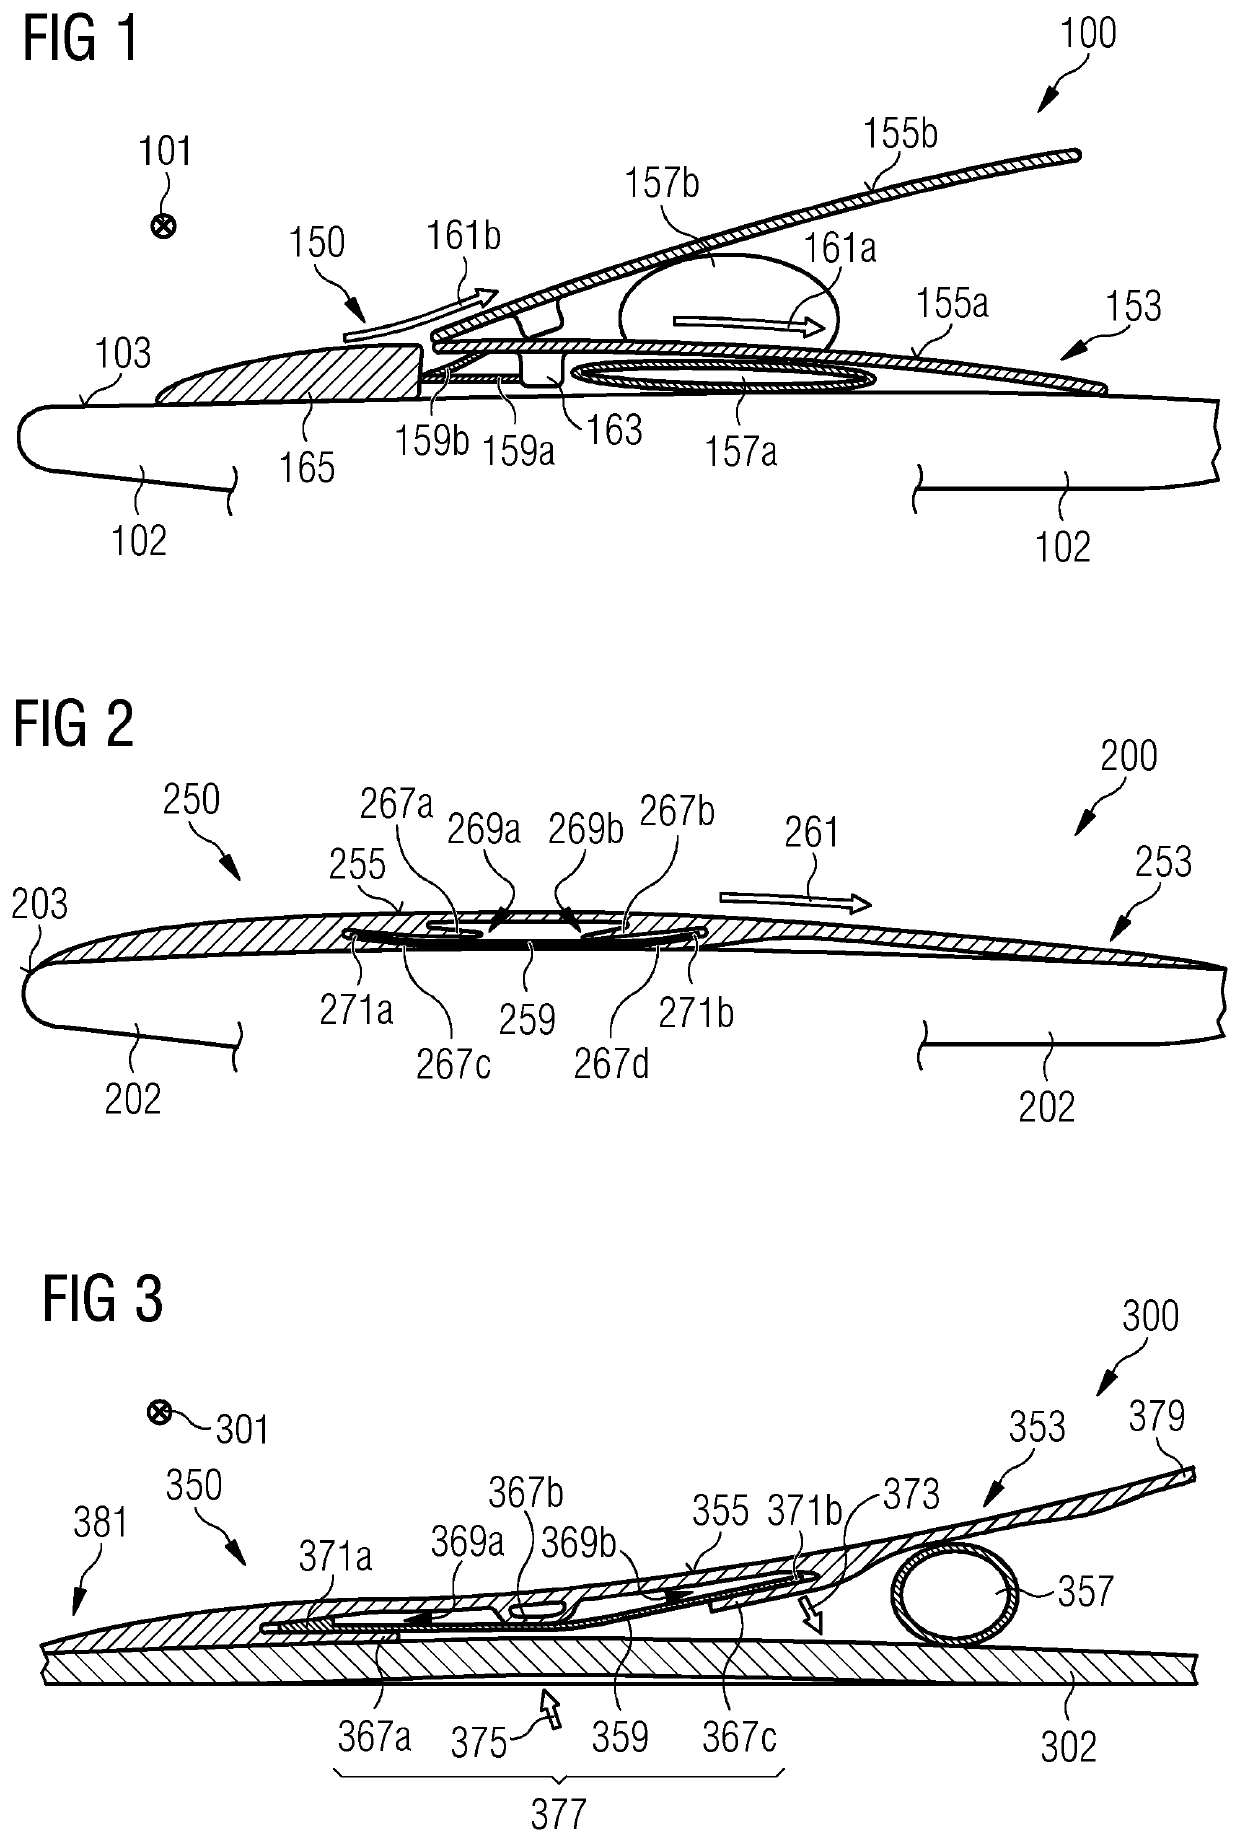 Adaptable spoiler for a wind turbine rotor blade